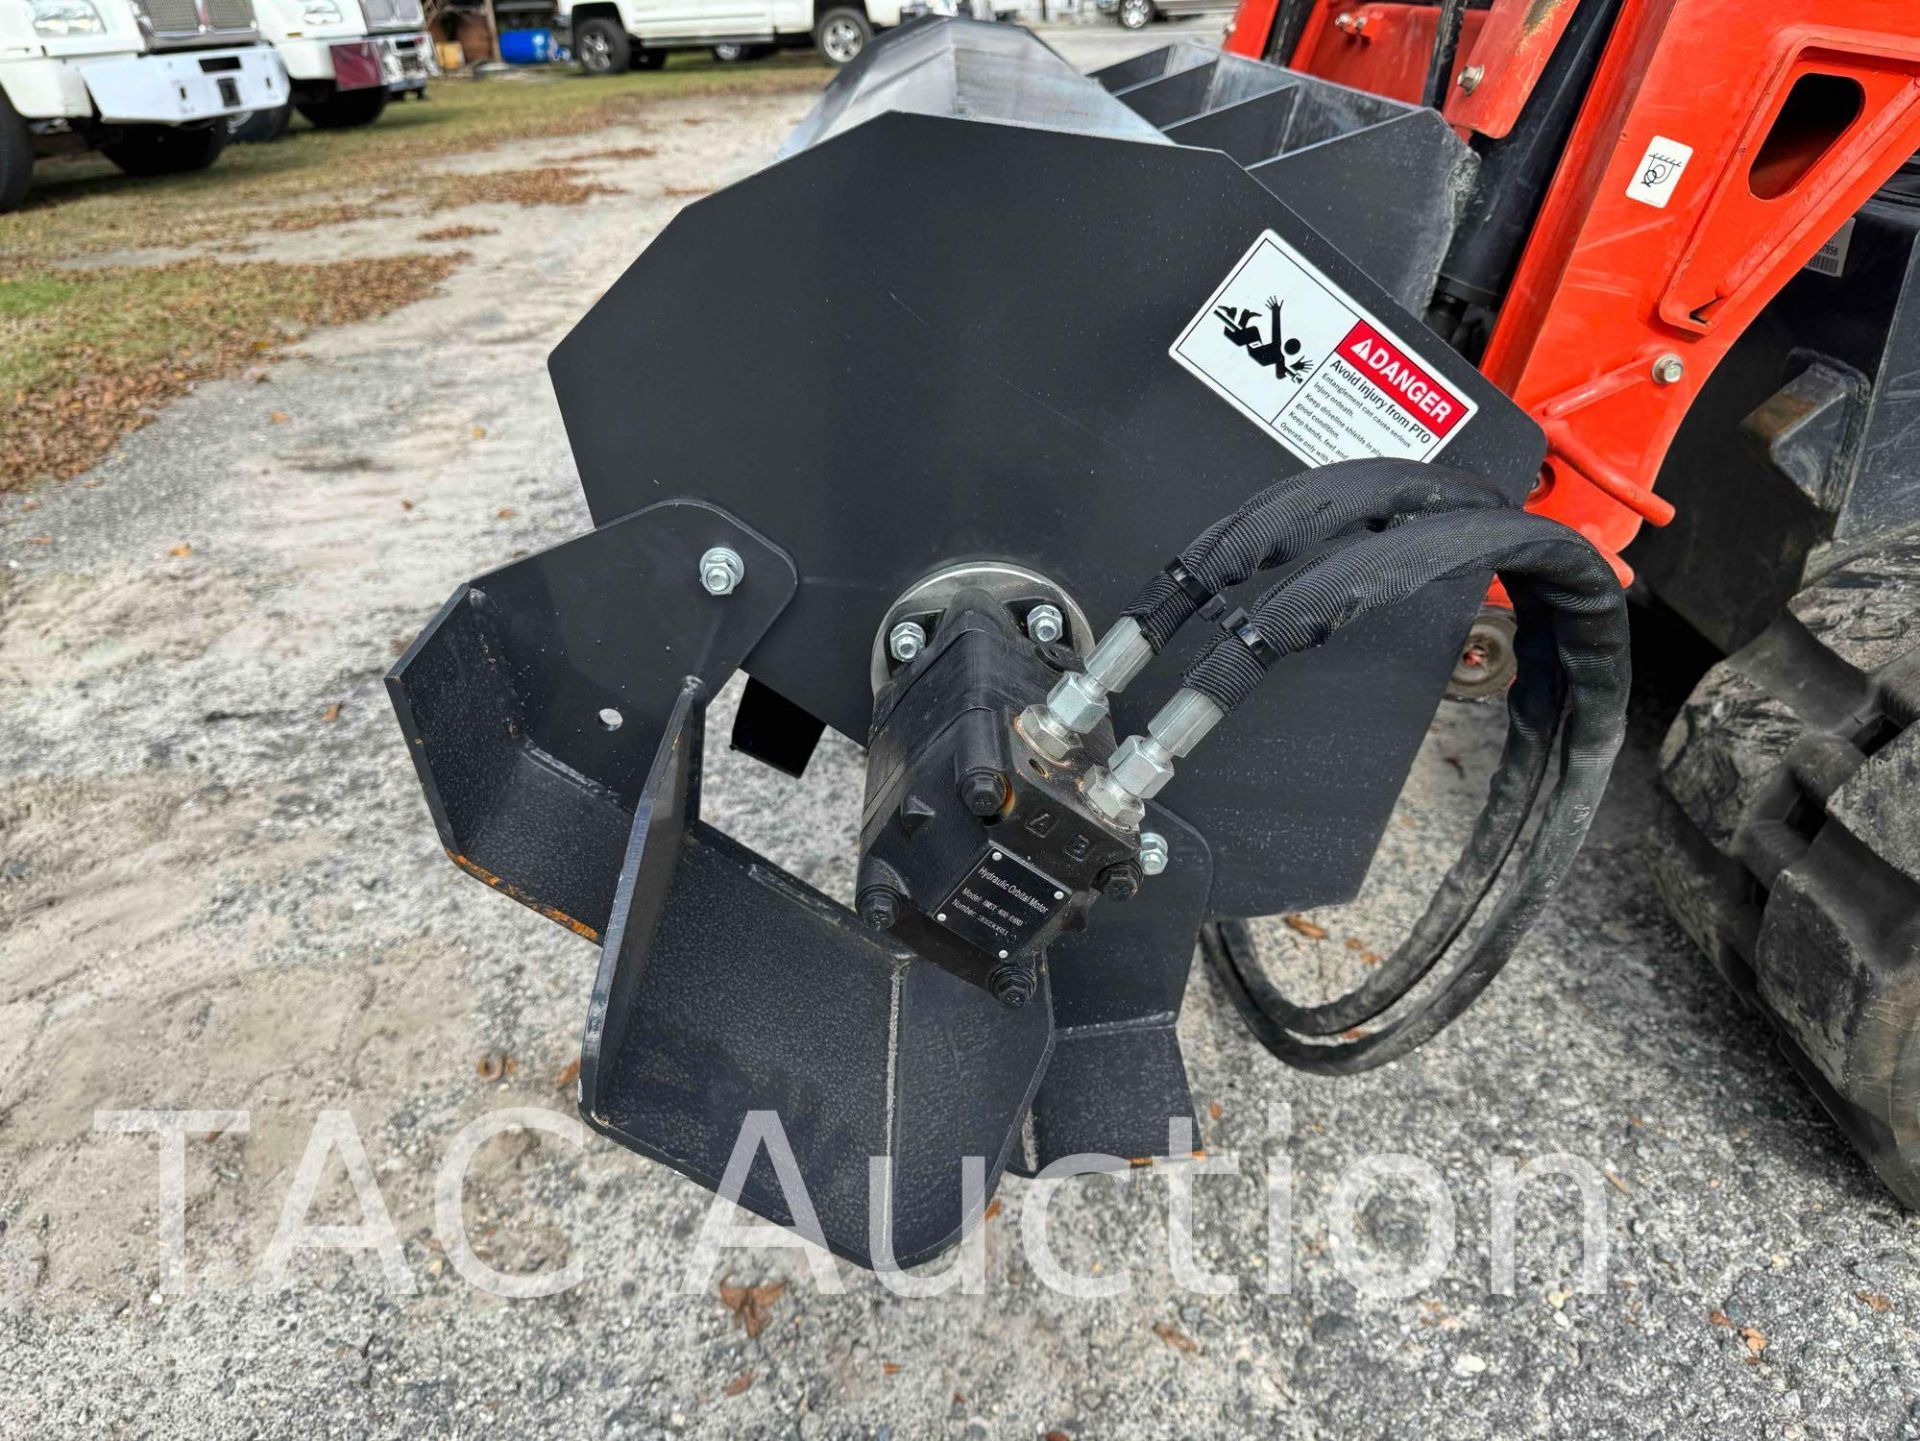 New Wolverine 72in Skid Steer Rotary Tiller Attachment - Image 4 of 6